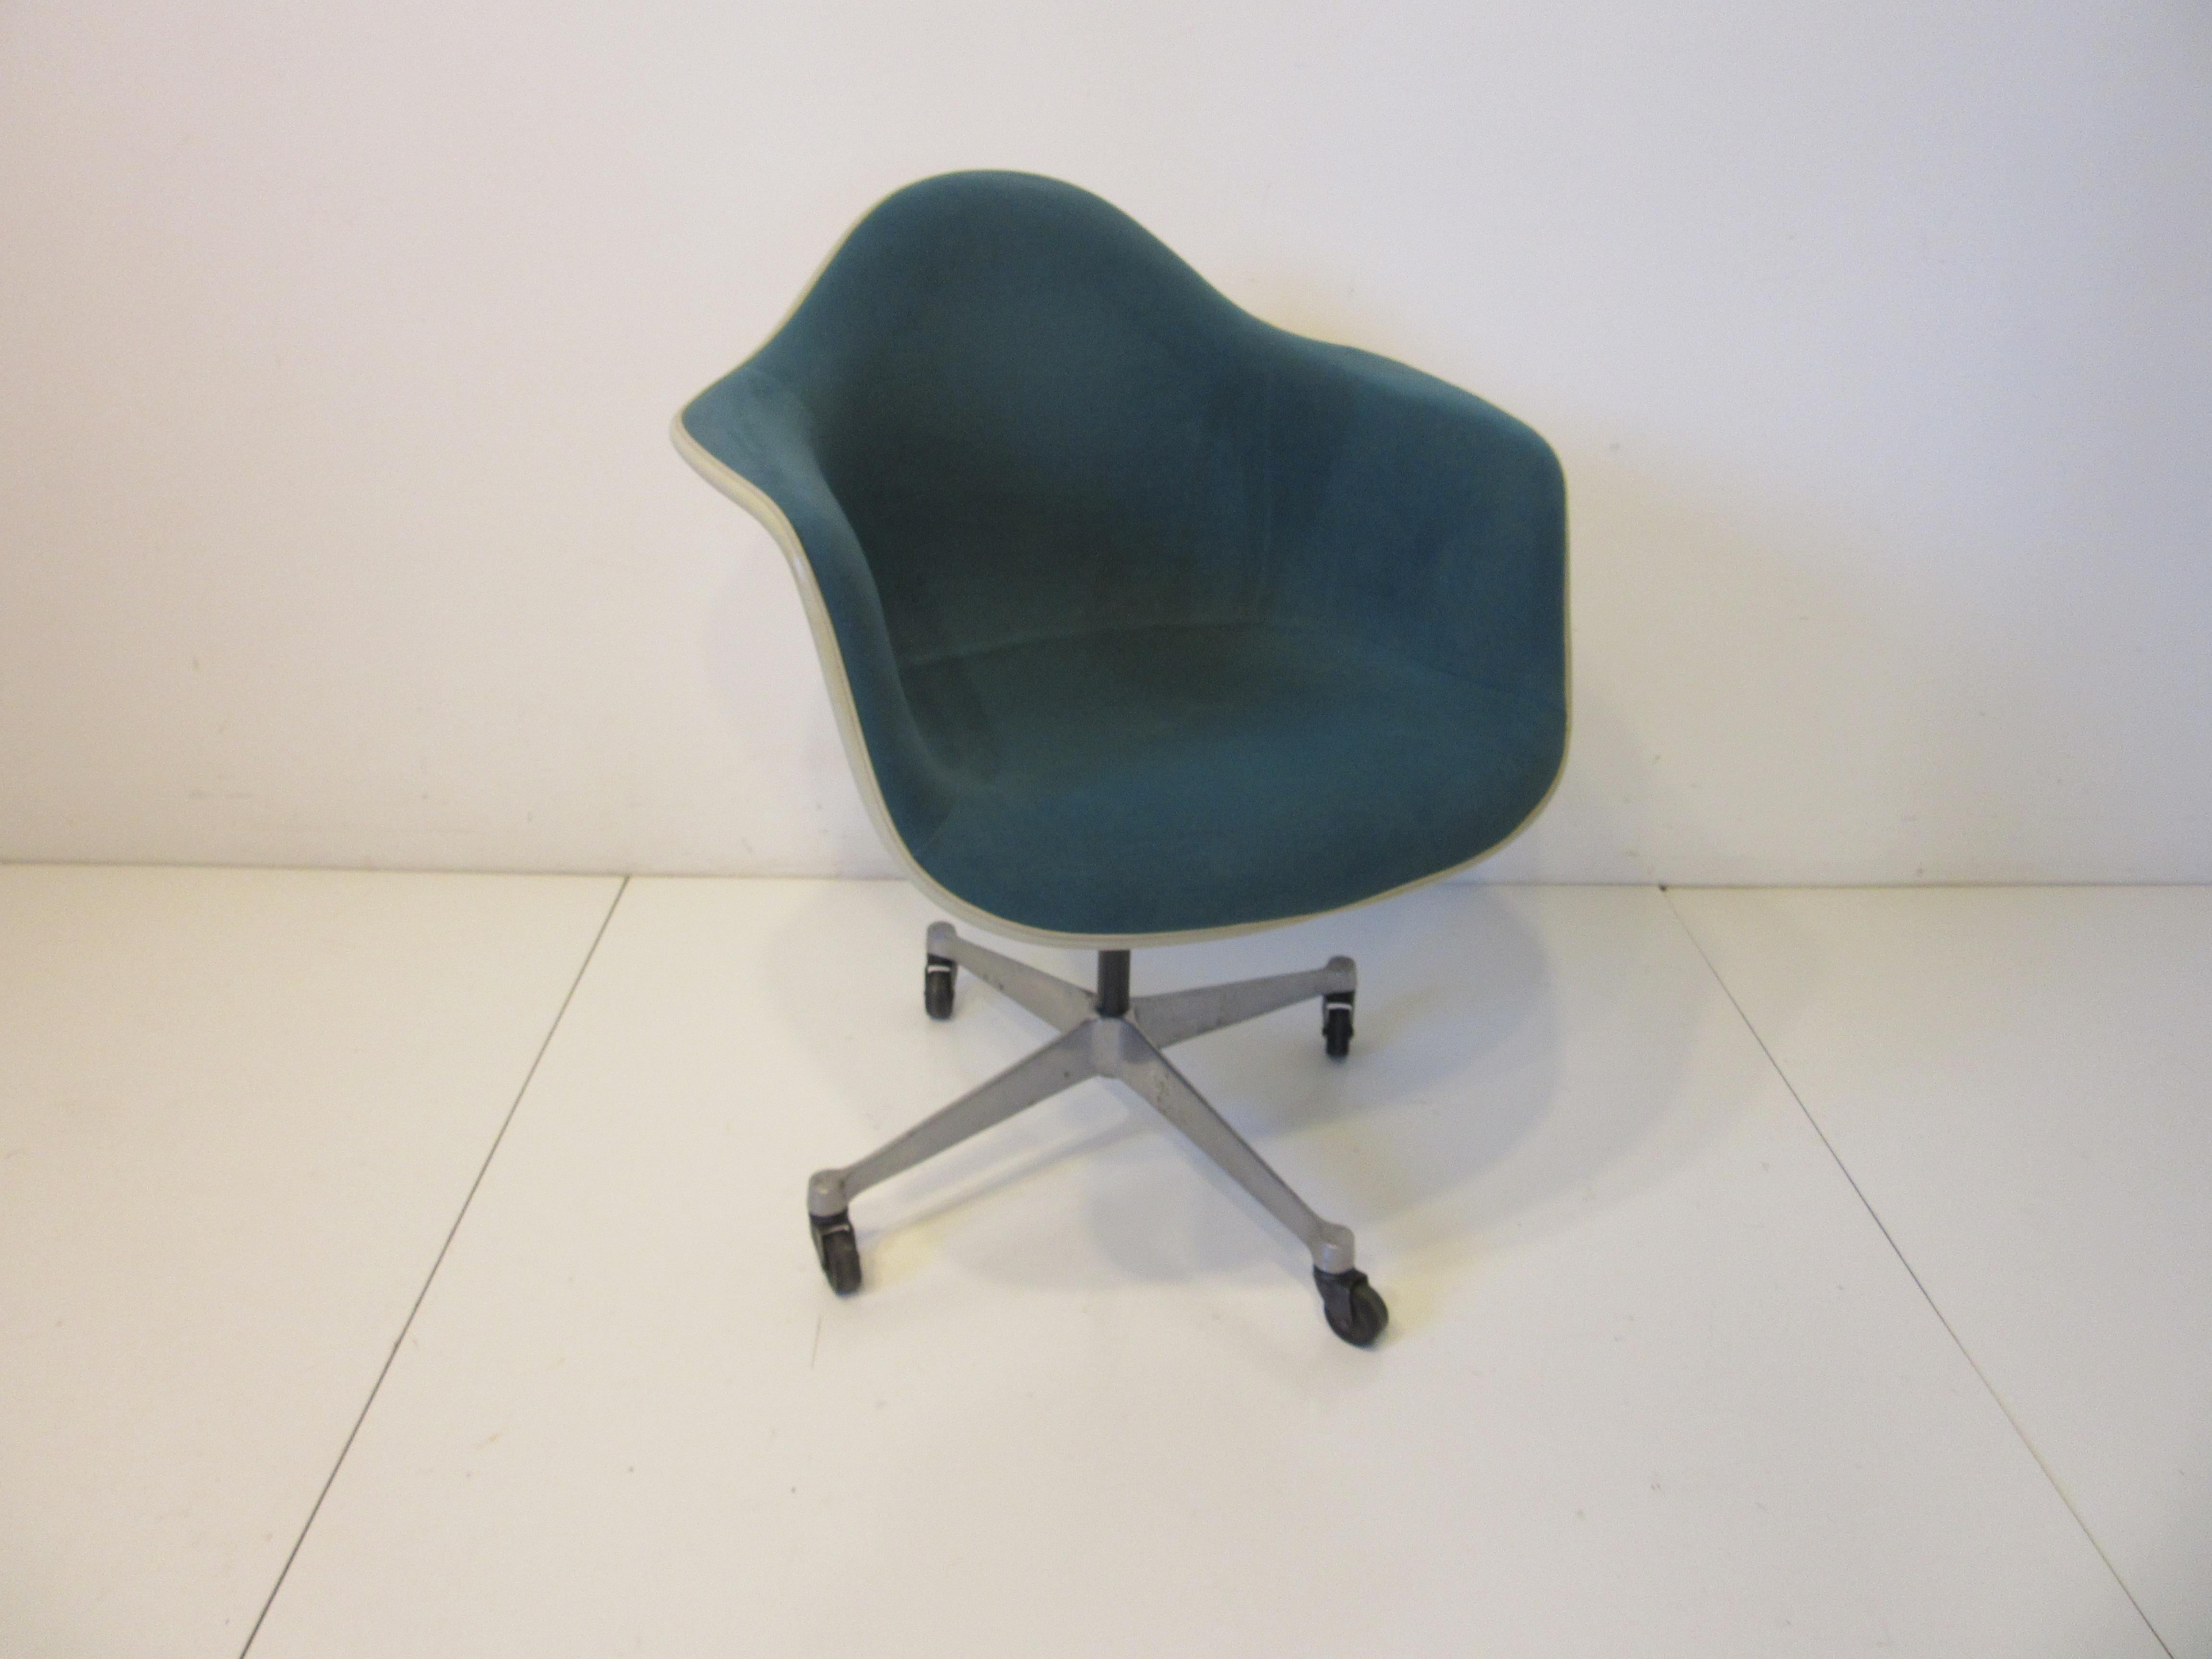 An upholstered Eames rolling arm shell desk chair in a medium aqua marine toned soft fabric with cream hard molded backside. The swiveling seat is supported by a satin black steel tube and sits on a four star cast aluminum base with black rubber